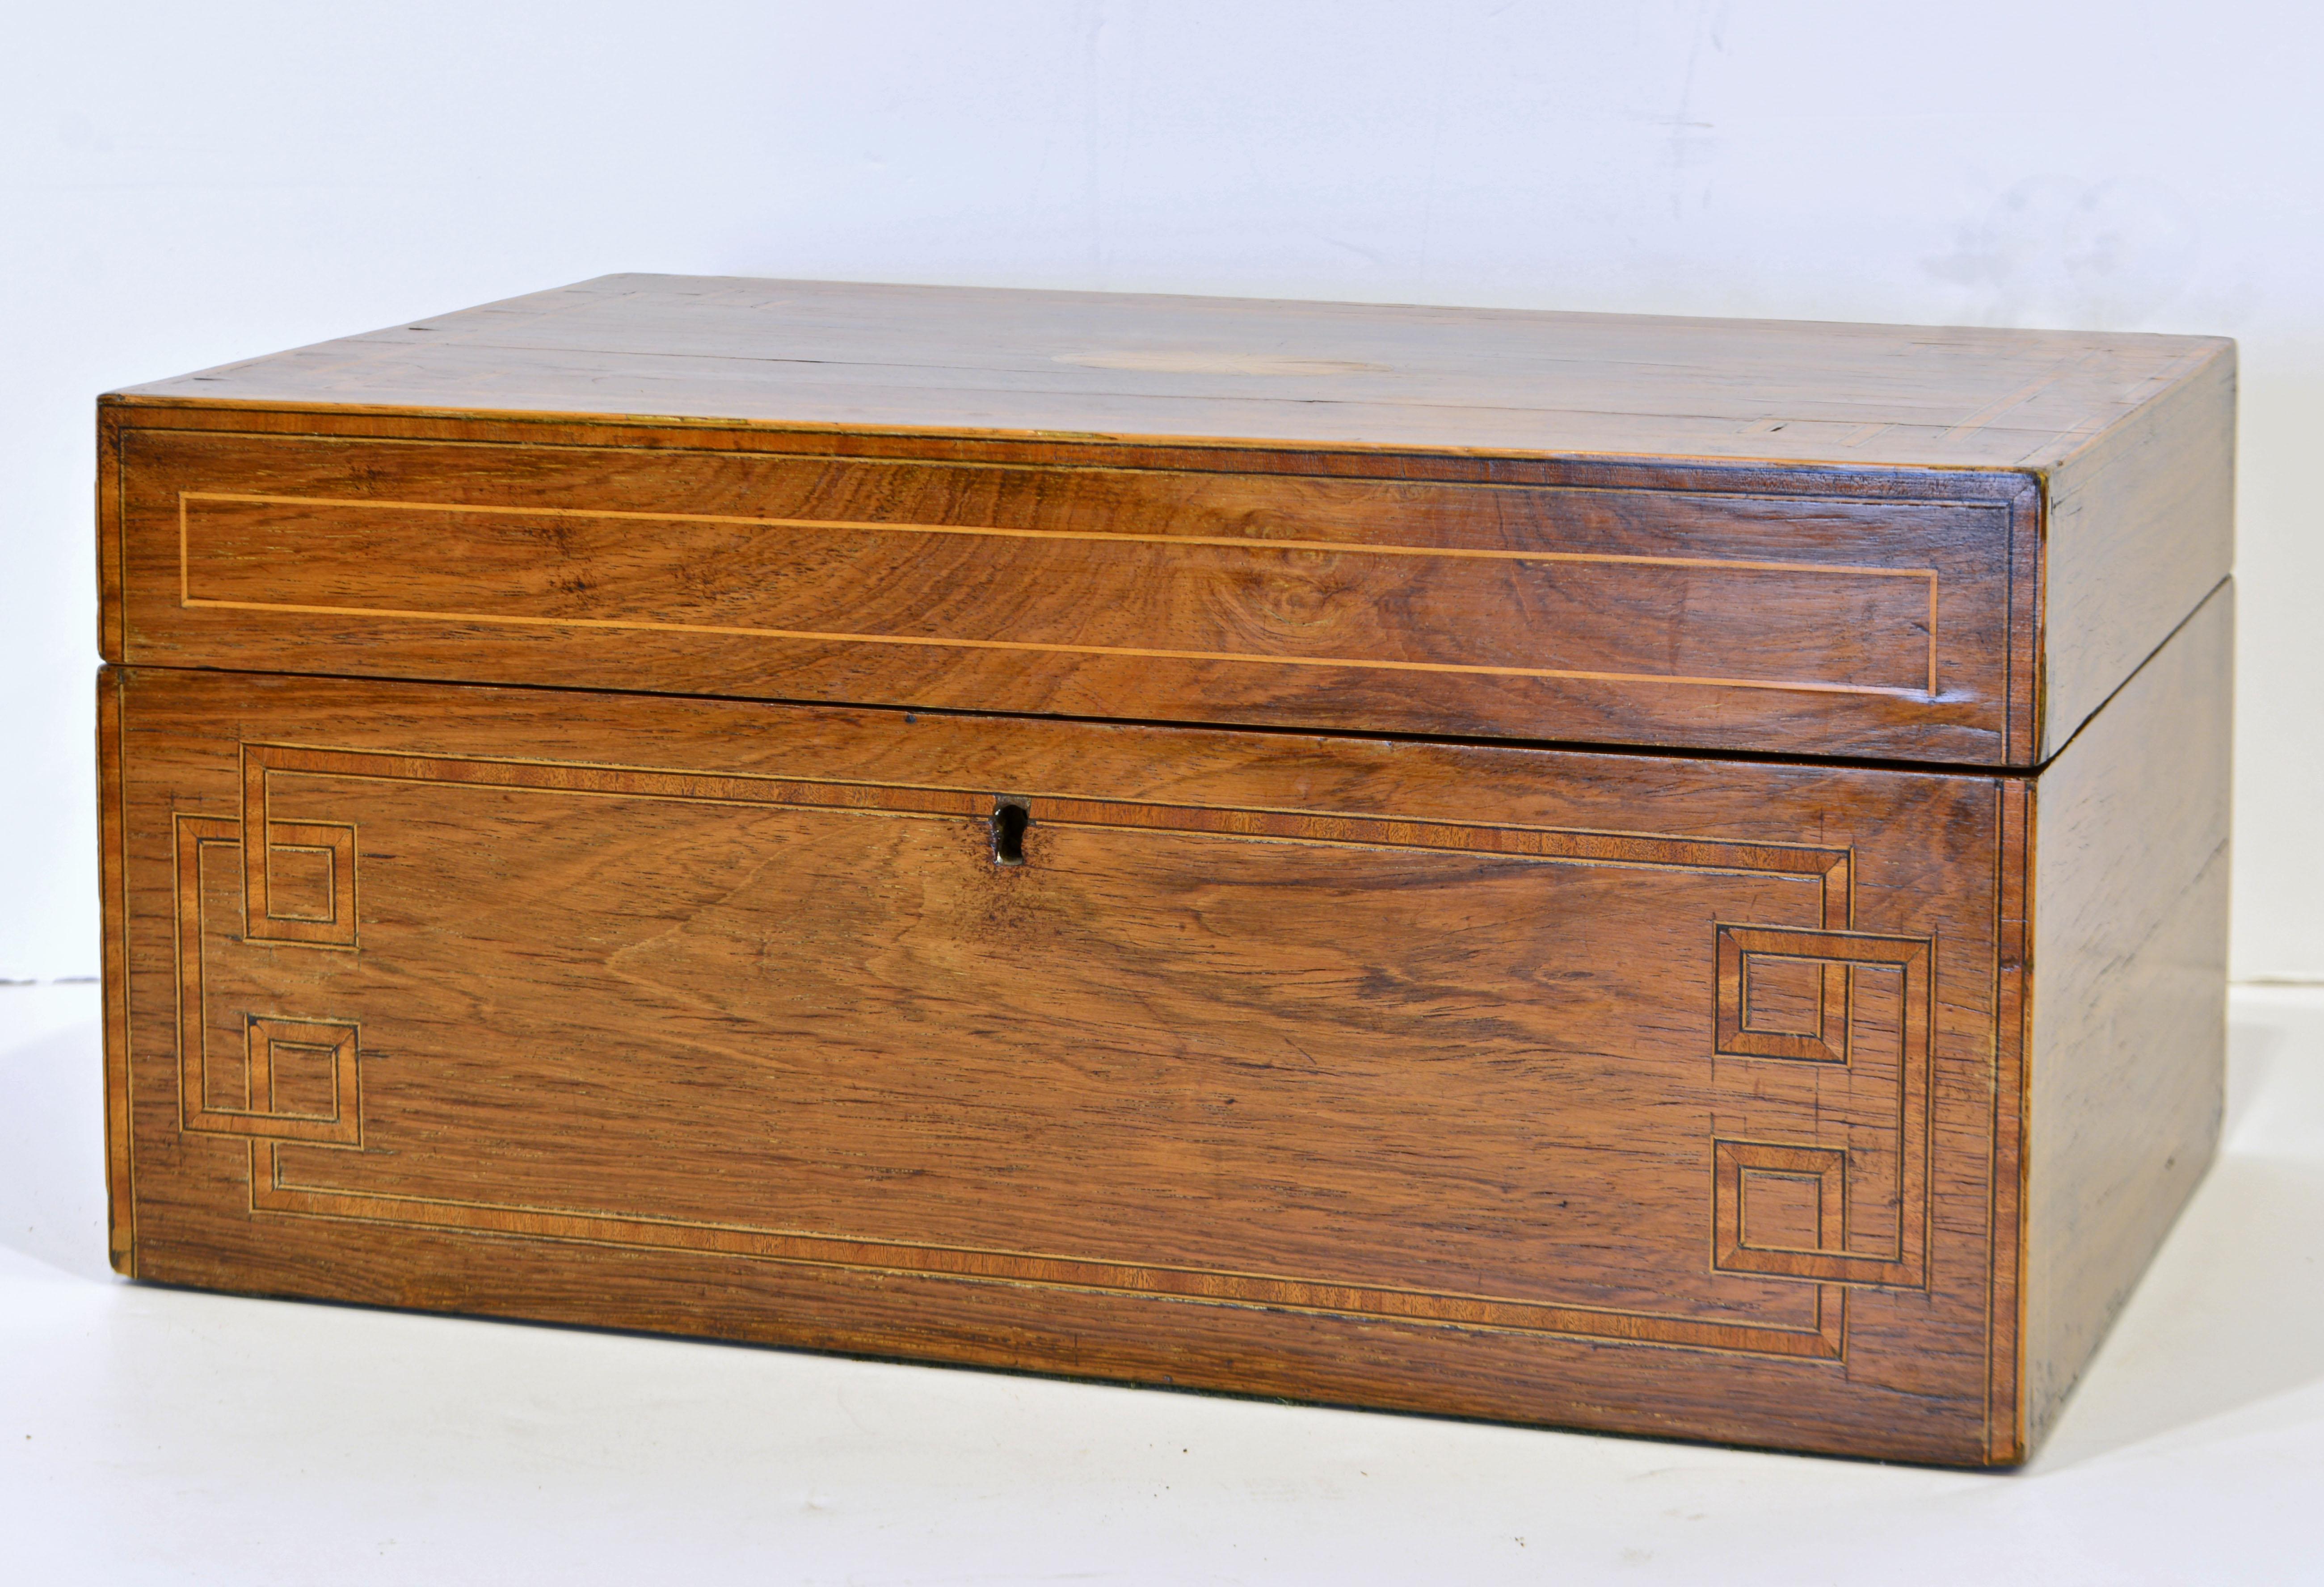 This regency mahogany table box features a delicate satinwood inlaid top in the classical style that opens up to an interior fitted with small compartments some of which have silk lined lids. The back of the top sports a silk lined paper compartment.